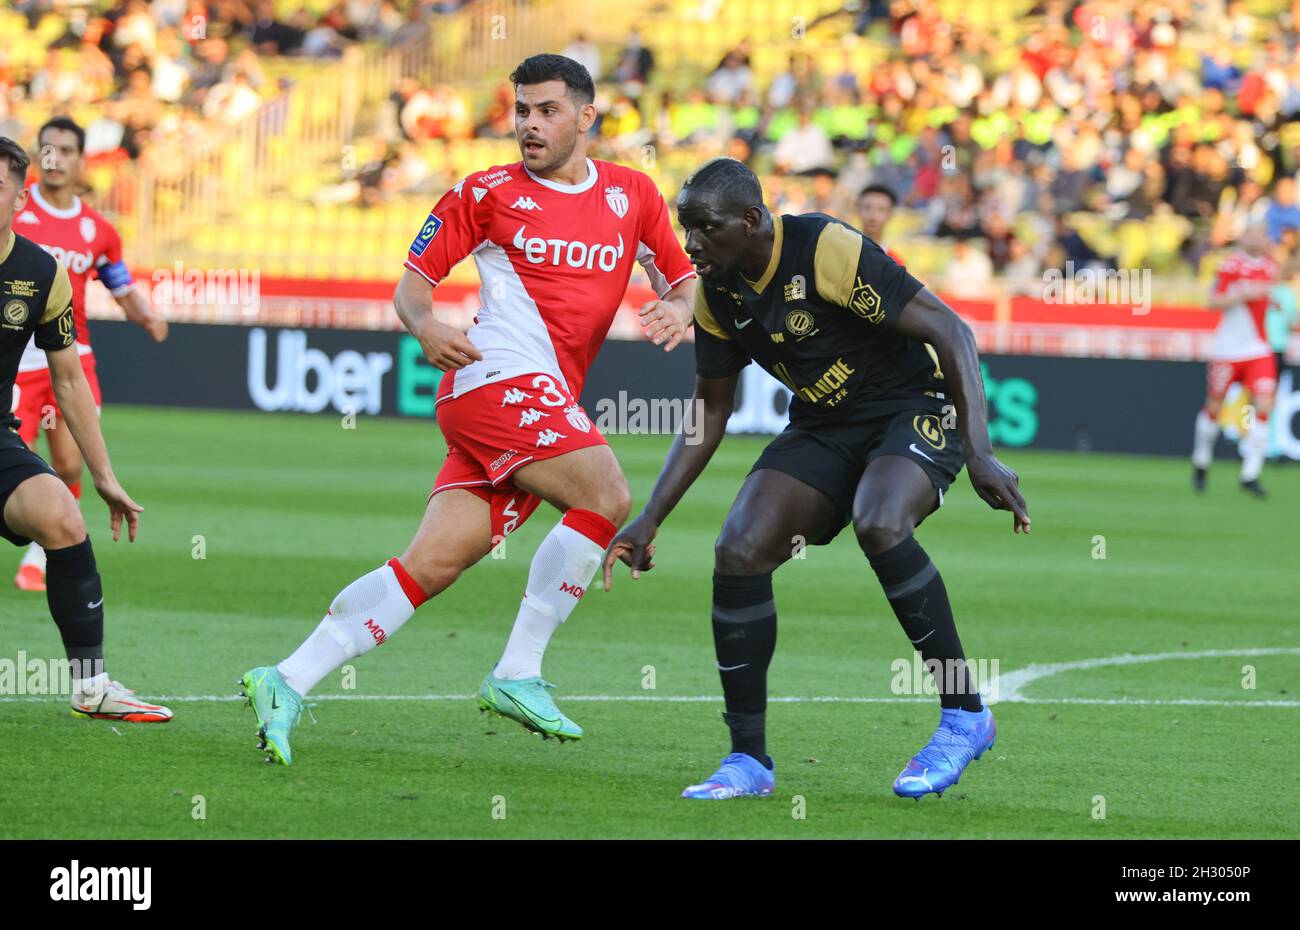 Monaco, Monte-Carlo - October 24, 2021: AS Monaco - Montpellier HSC  Football Match at the Stade Louis II with german Forward Kevin Volland.  French Ligue 1, L1. (Photo by Mandoga Media/Sipa USA